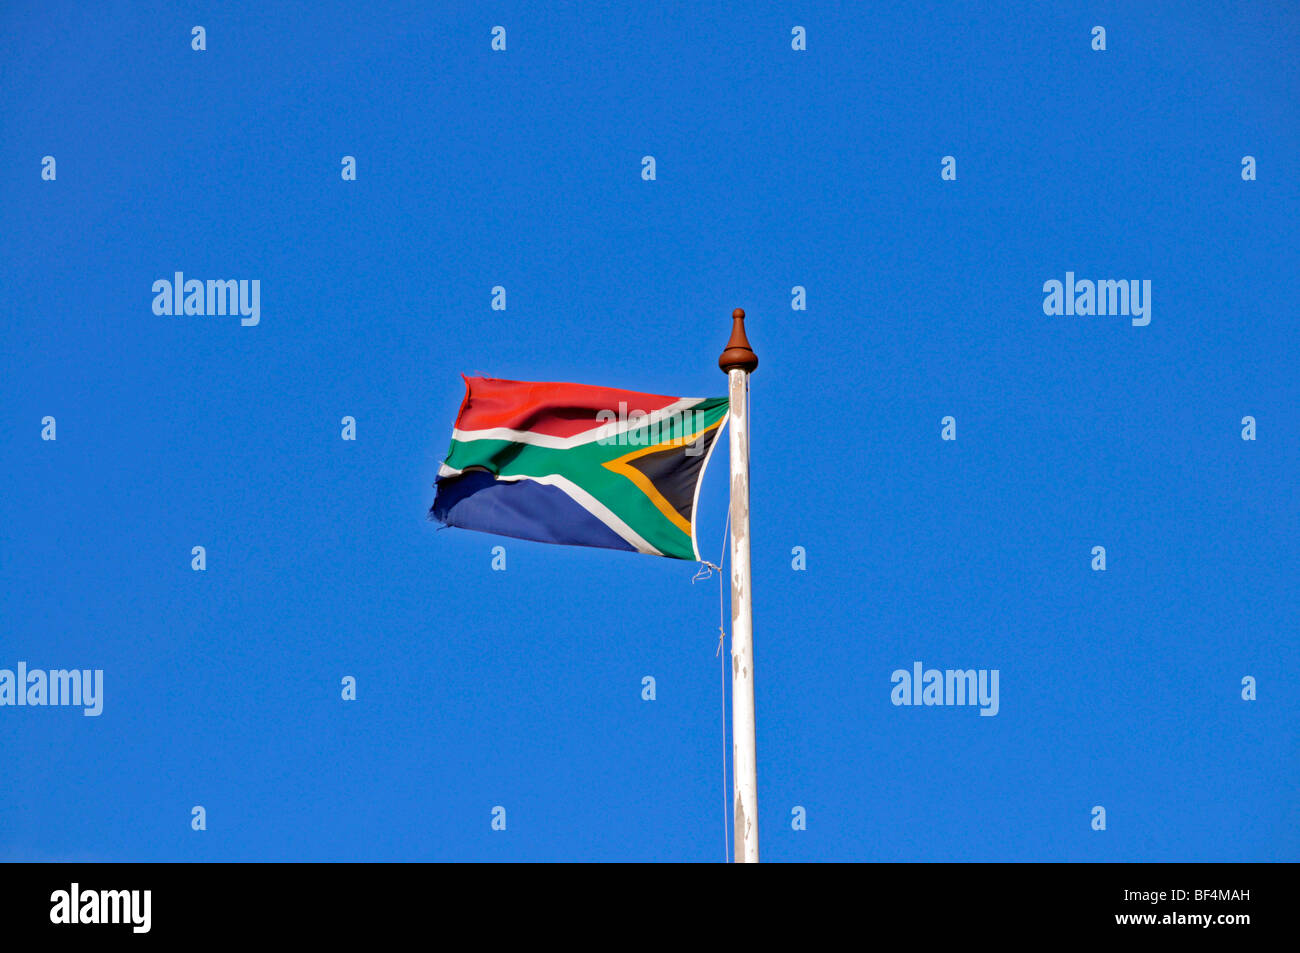 Flag of South Africa, Port Elizabeth, Eastern Cape, South Africa, Africa Stock Photo